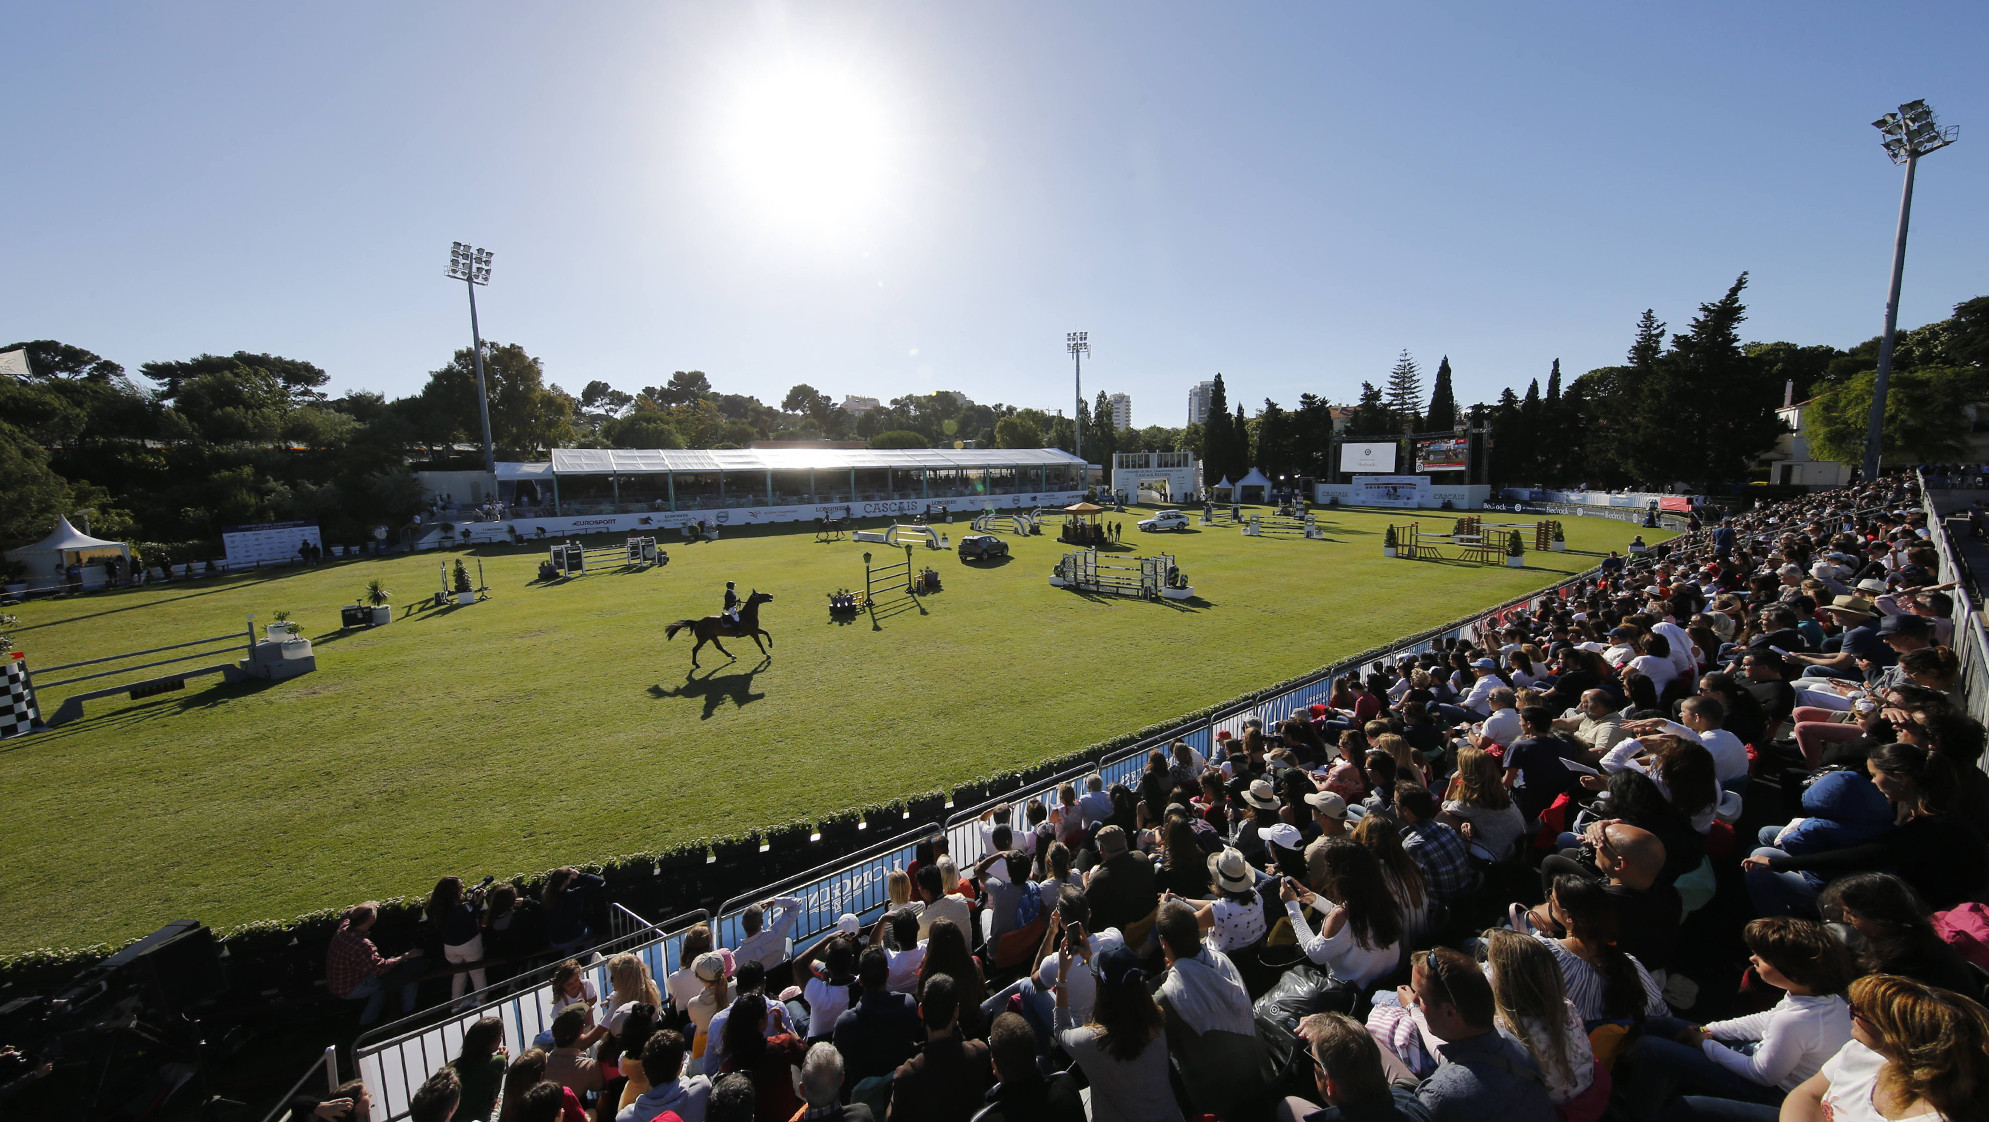 Devos out to reclaim top spot with Longines Global Champions Tour set to continue in Estoril